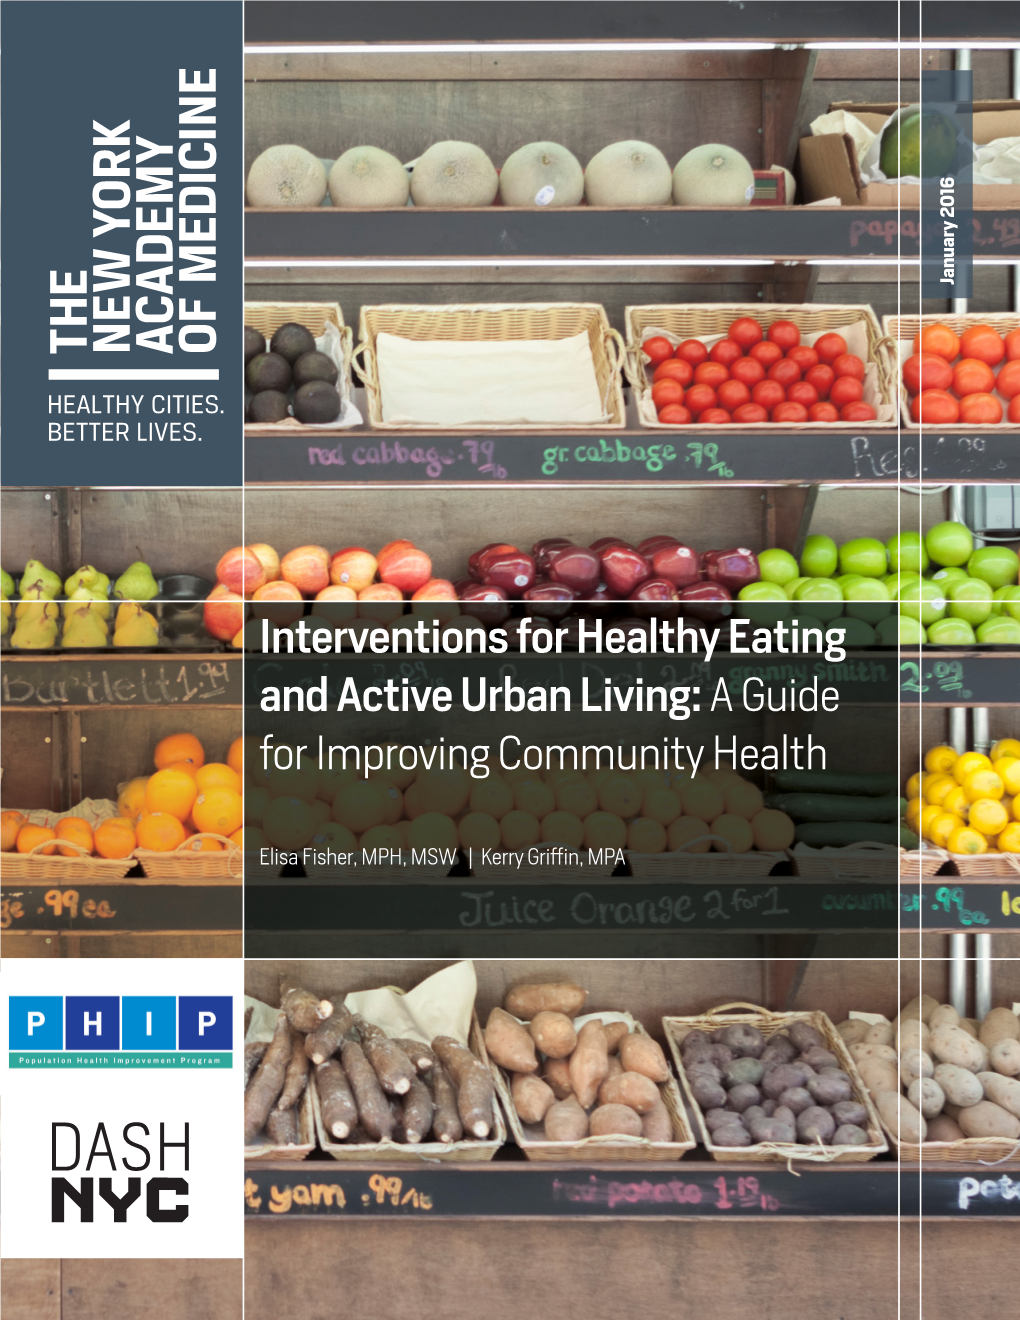 Interventions for Healthy Eating and Active Urban Living: a Guide for Improving Community Health